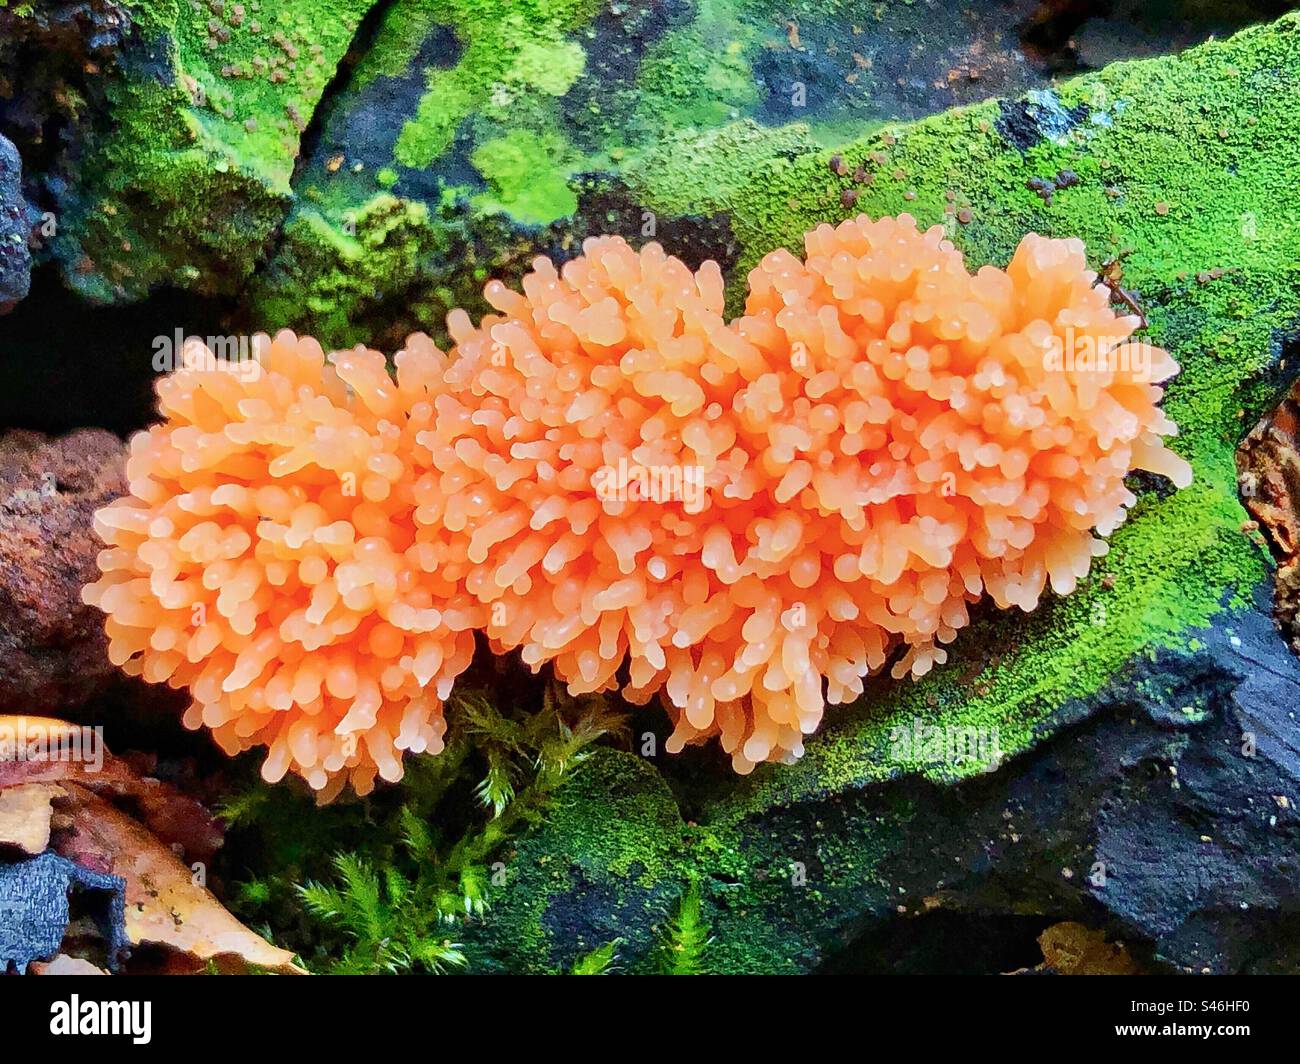 Raspberry slime mold or red raspberry slime mold (Tubifera ferruginosa) growing on a rotten tree stump in August at Brockenhurst, New Forest National Park Hampshire, United Kingdom Stock Photo